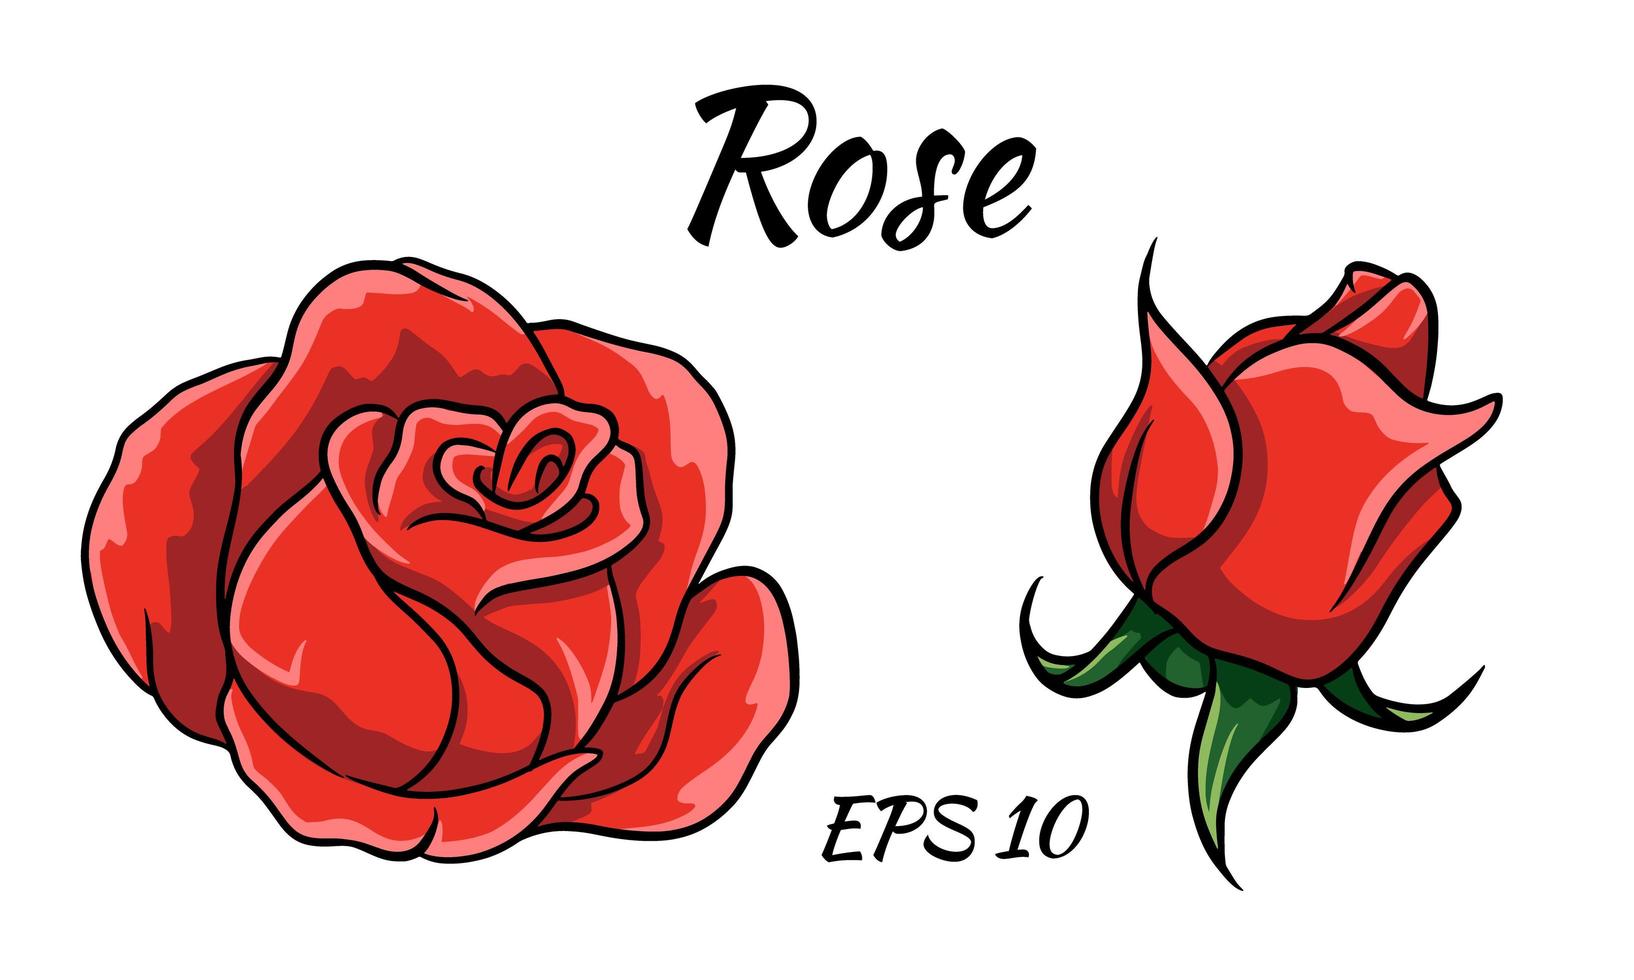 Red rose cartoon style on a white background. vector